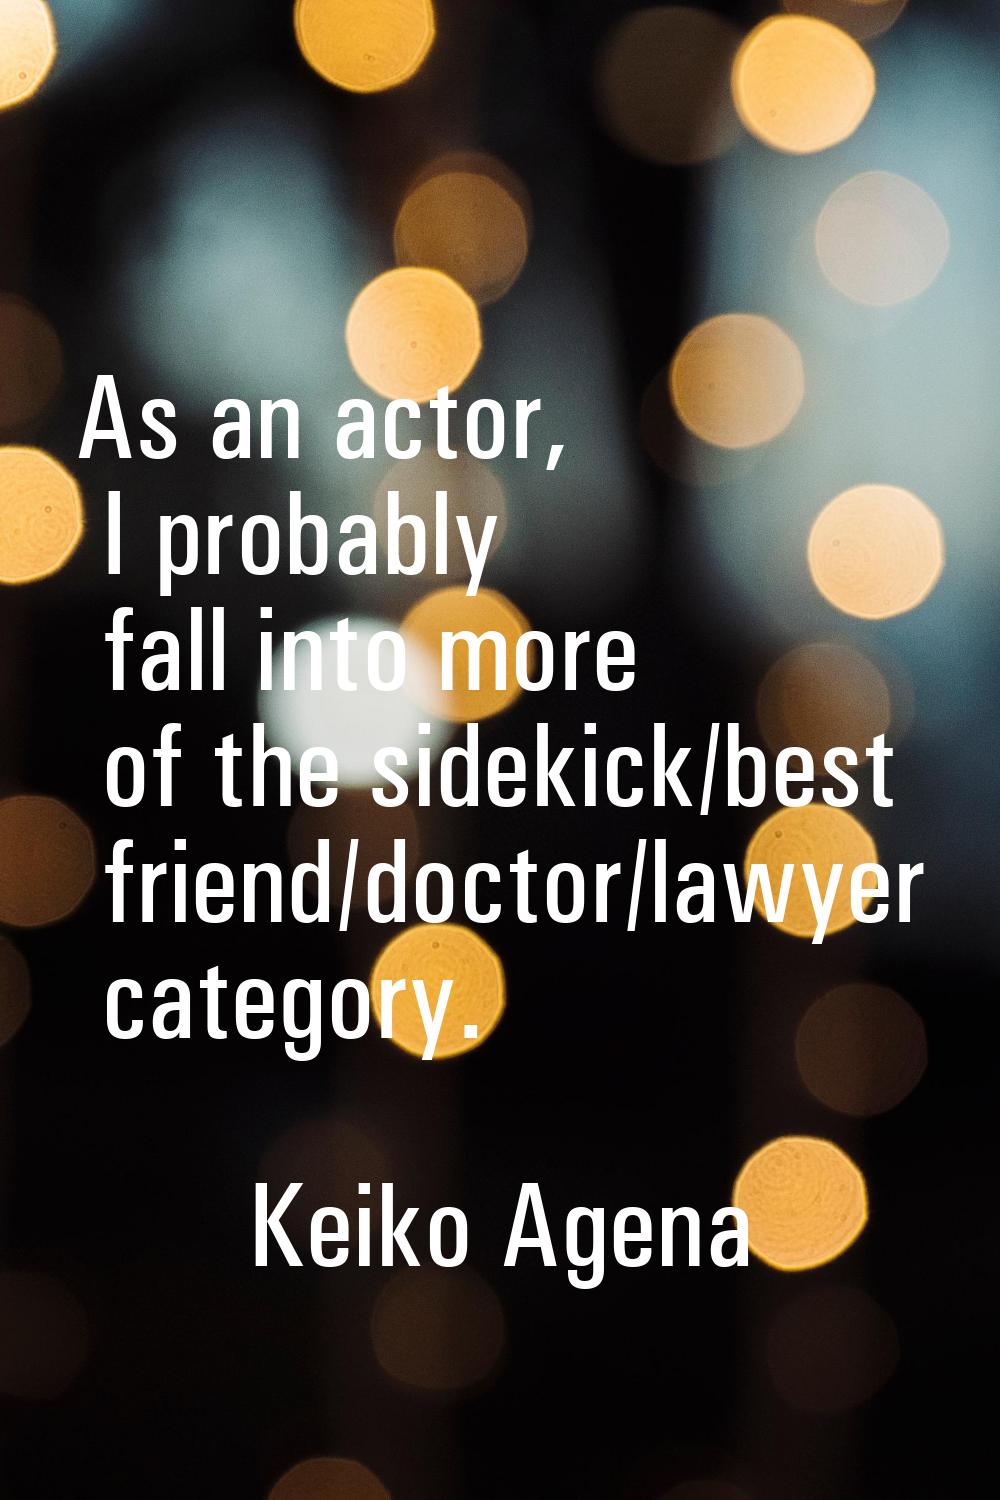 As an actor, I probably fall into more of the sidekick/best friend/doctor/lawyer category.